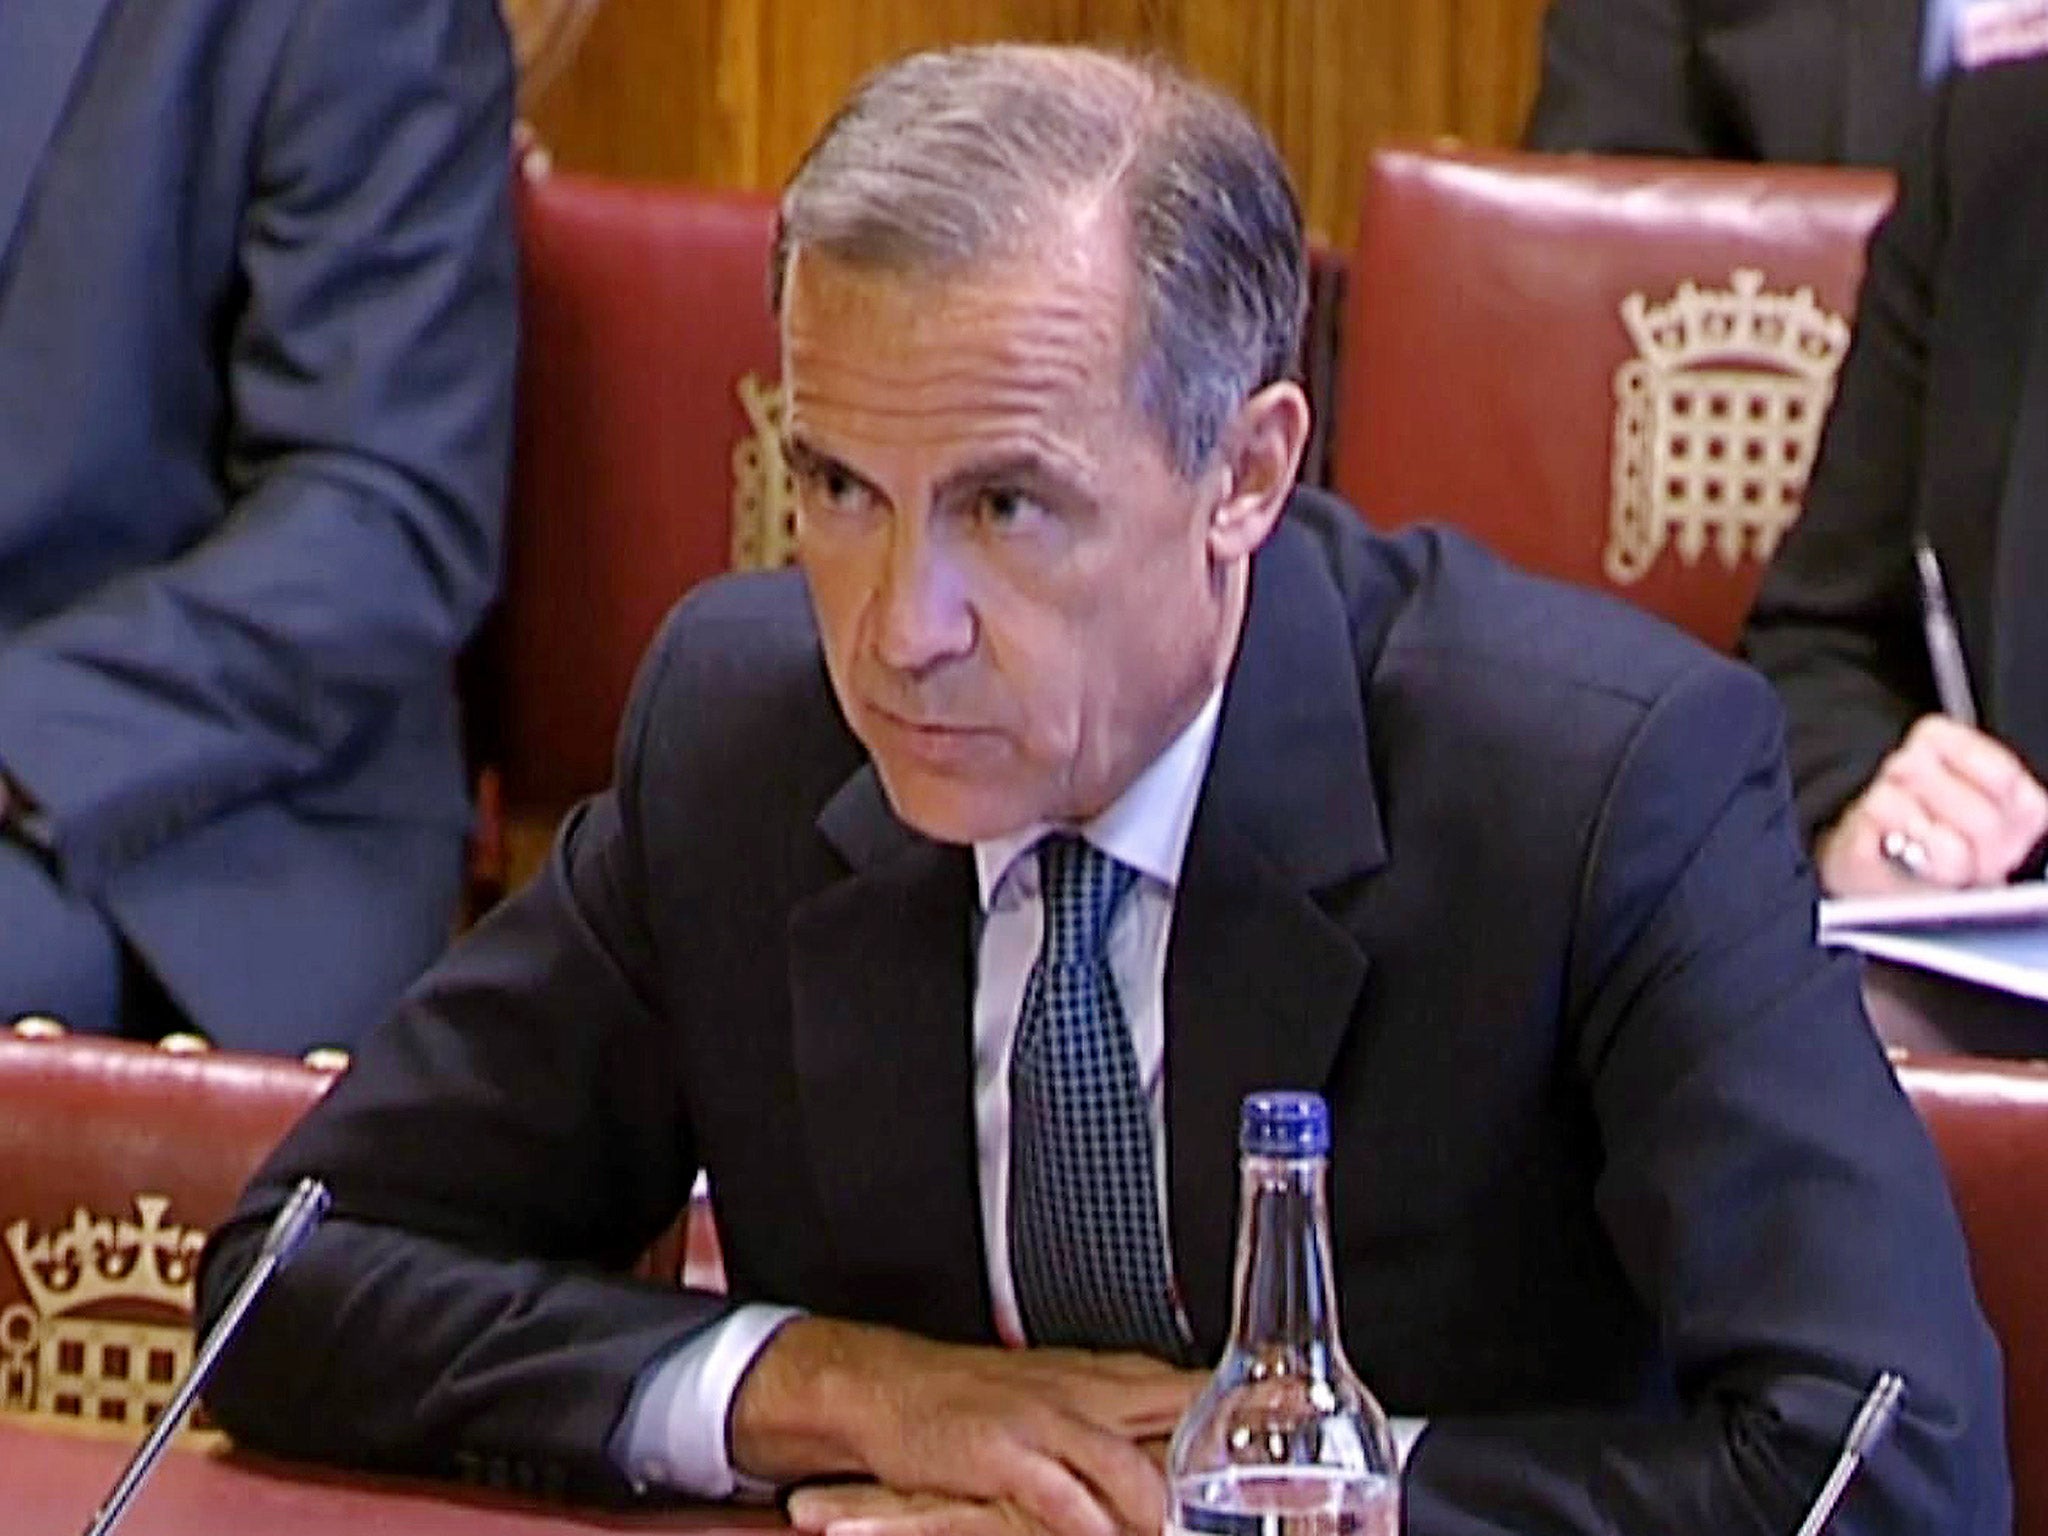 Bank of England Governor Mark Carney gives evidence to the Economic Affairs Committee at the House of Lords